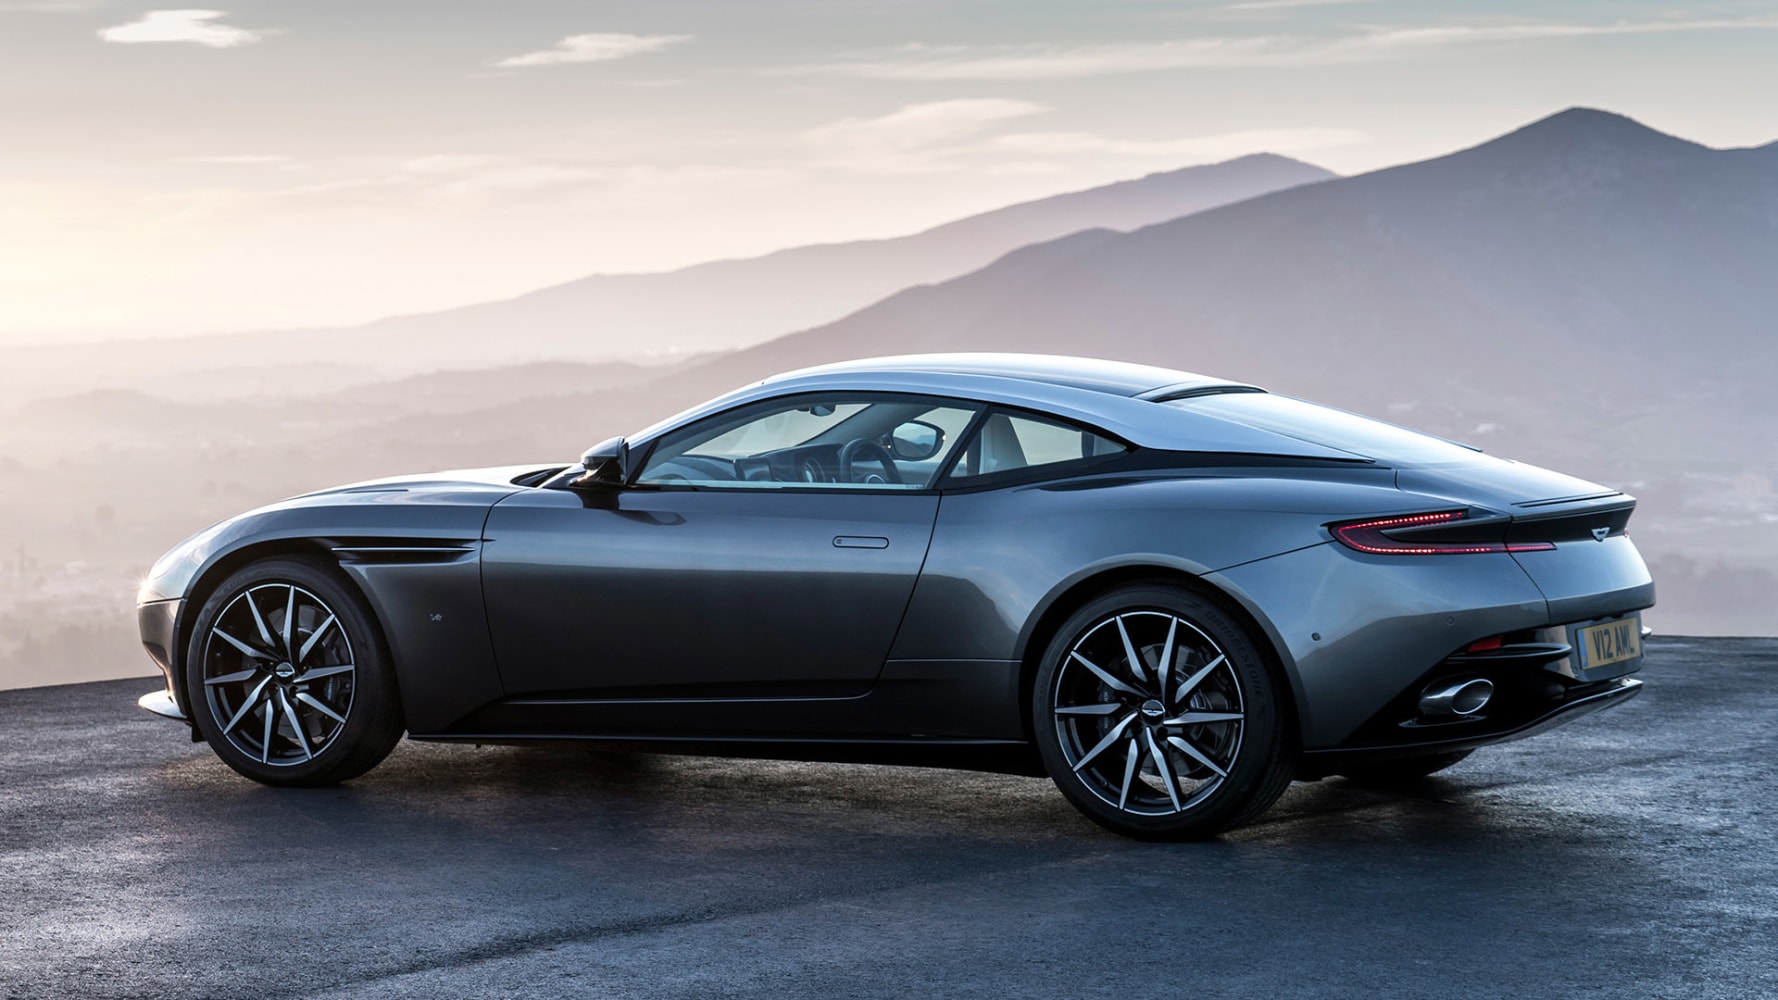 Aston Martin's Quantum Leap: Why 007 Might Not Recognize ...